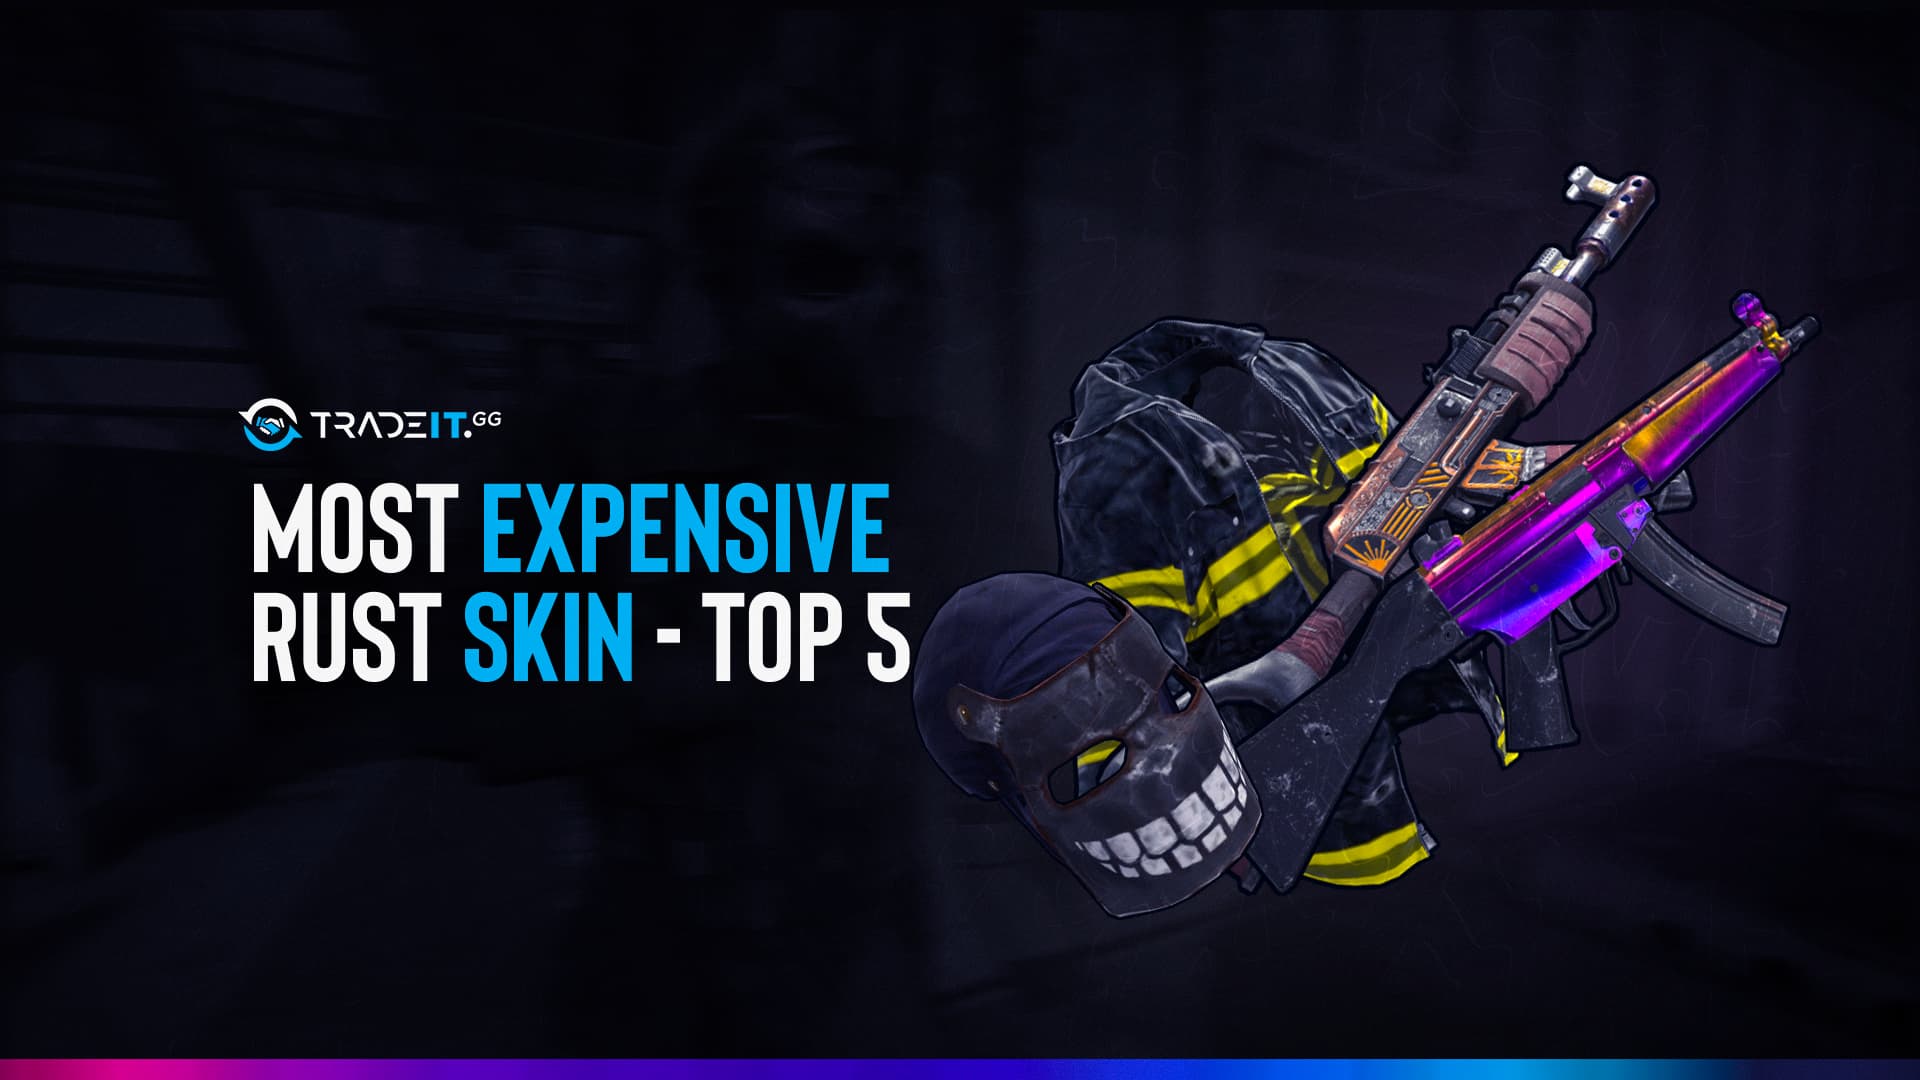 Most Expensive Rust Skin - Top 5